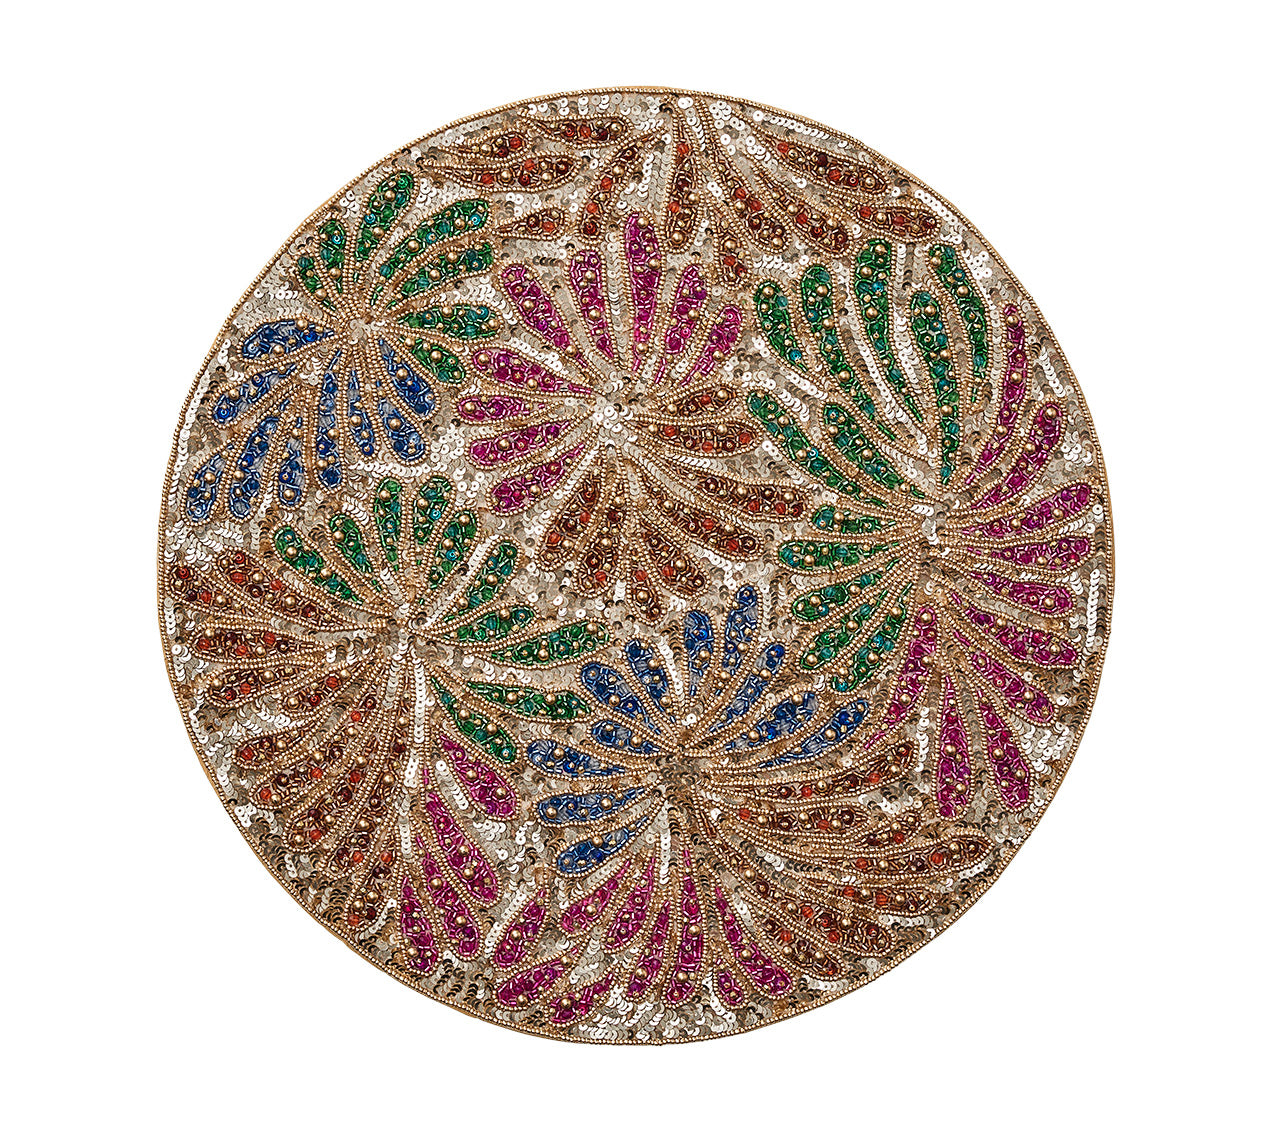 Fireworks Placemat in Gold & Multi, Set of 2